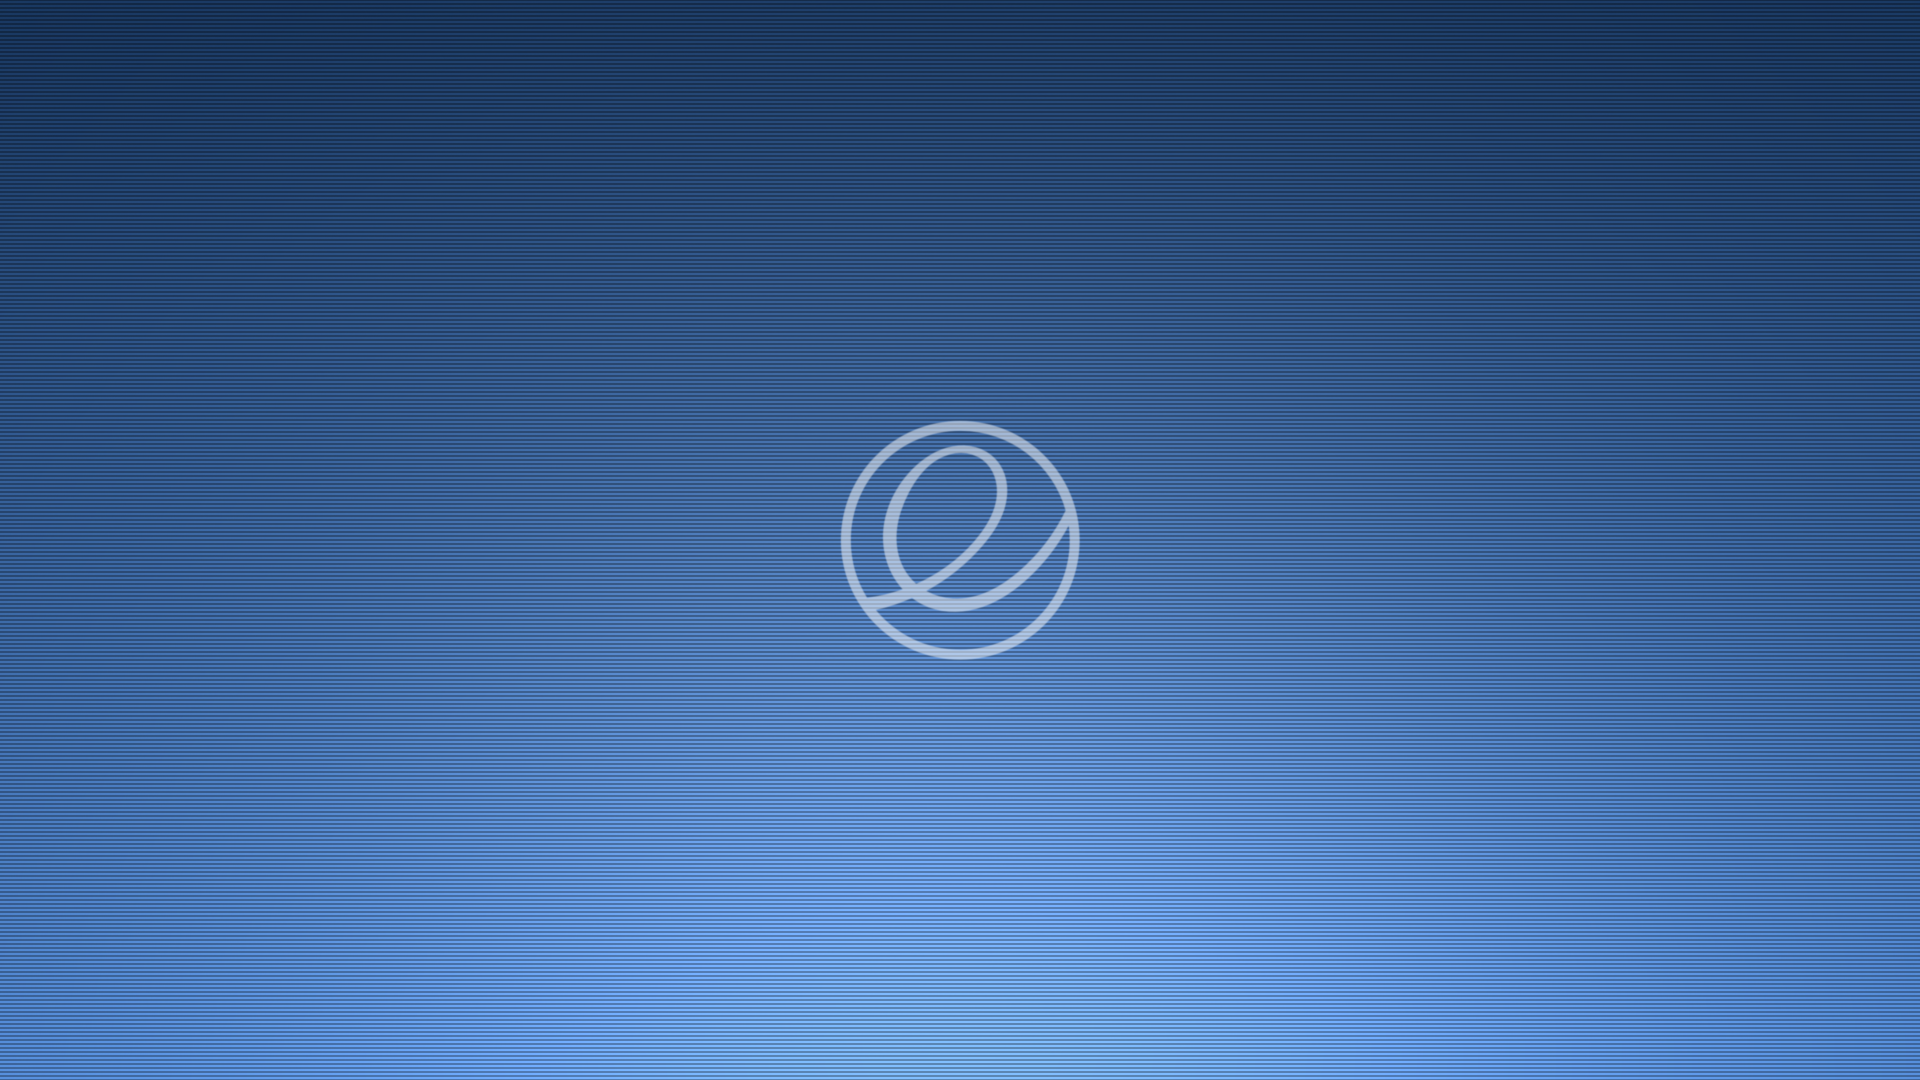 Check Out These Beautiful Elementary Os Wallpaper Lme Linux